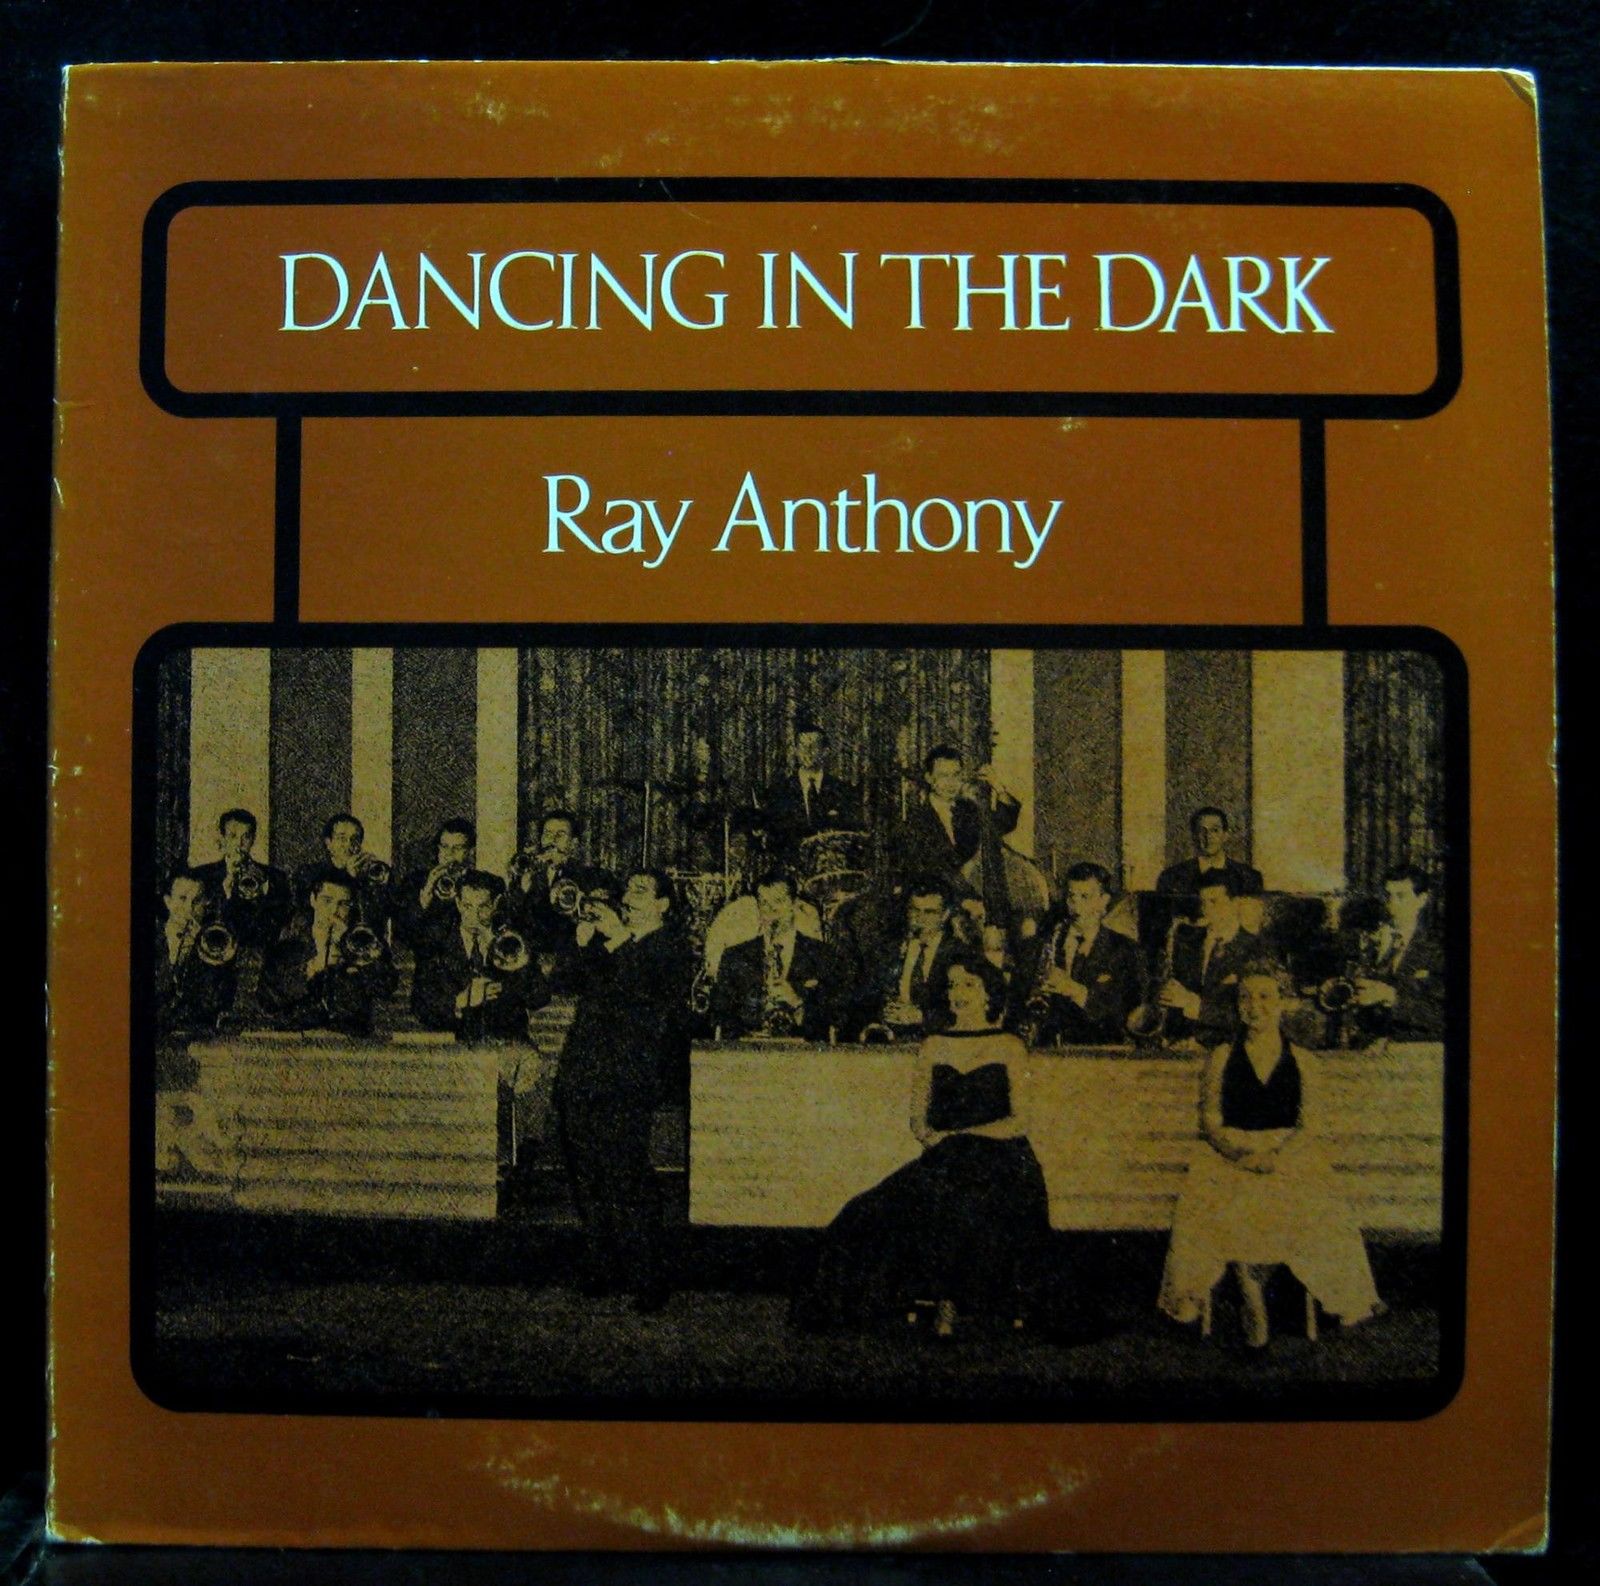 RAY ANTHONY - Dancing in the Dark cover 